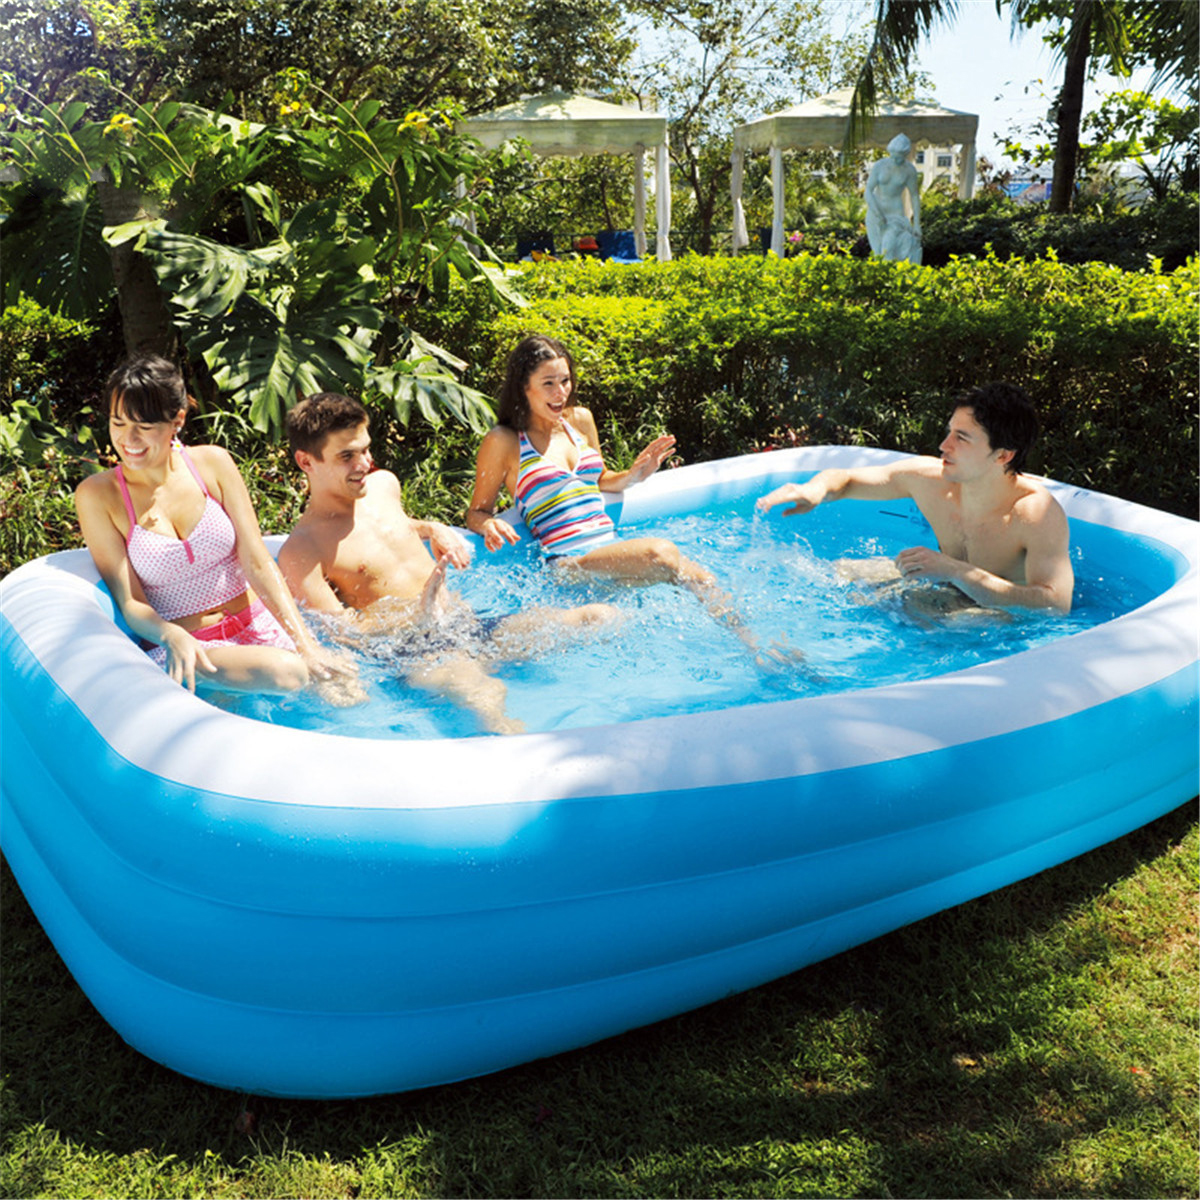 Portable-Outdoor-Inflatable-Swimming-Pool-Childrens-Pool-Family--Indoor-Large-Bathing-Tub-For-Baby-K-1715012-6